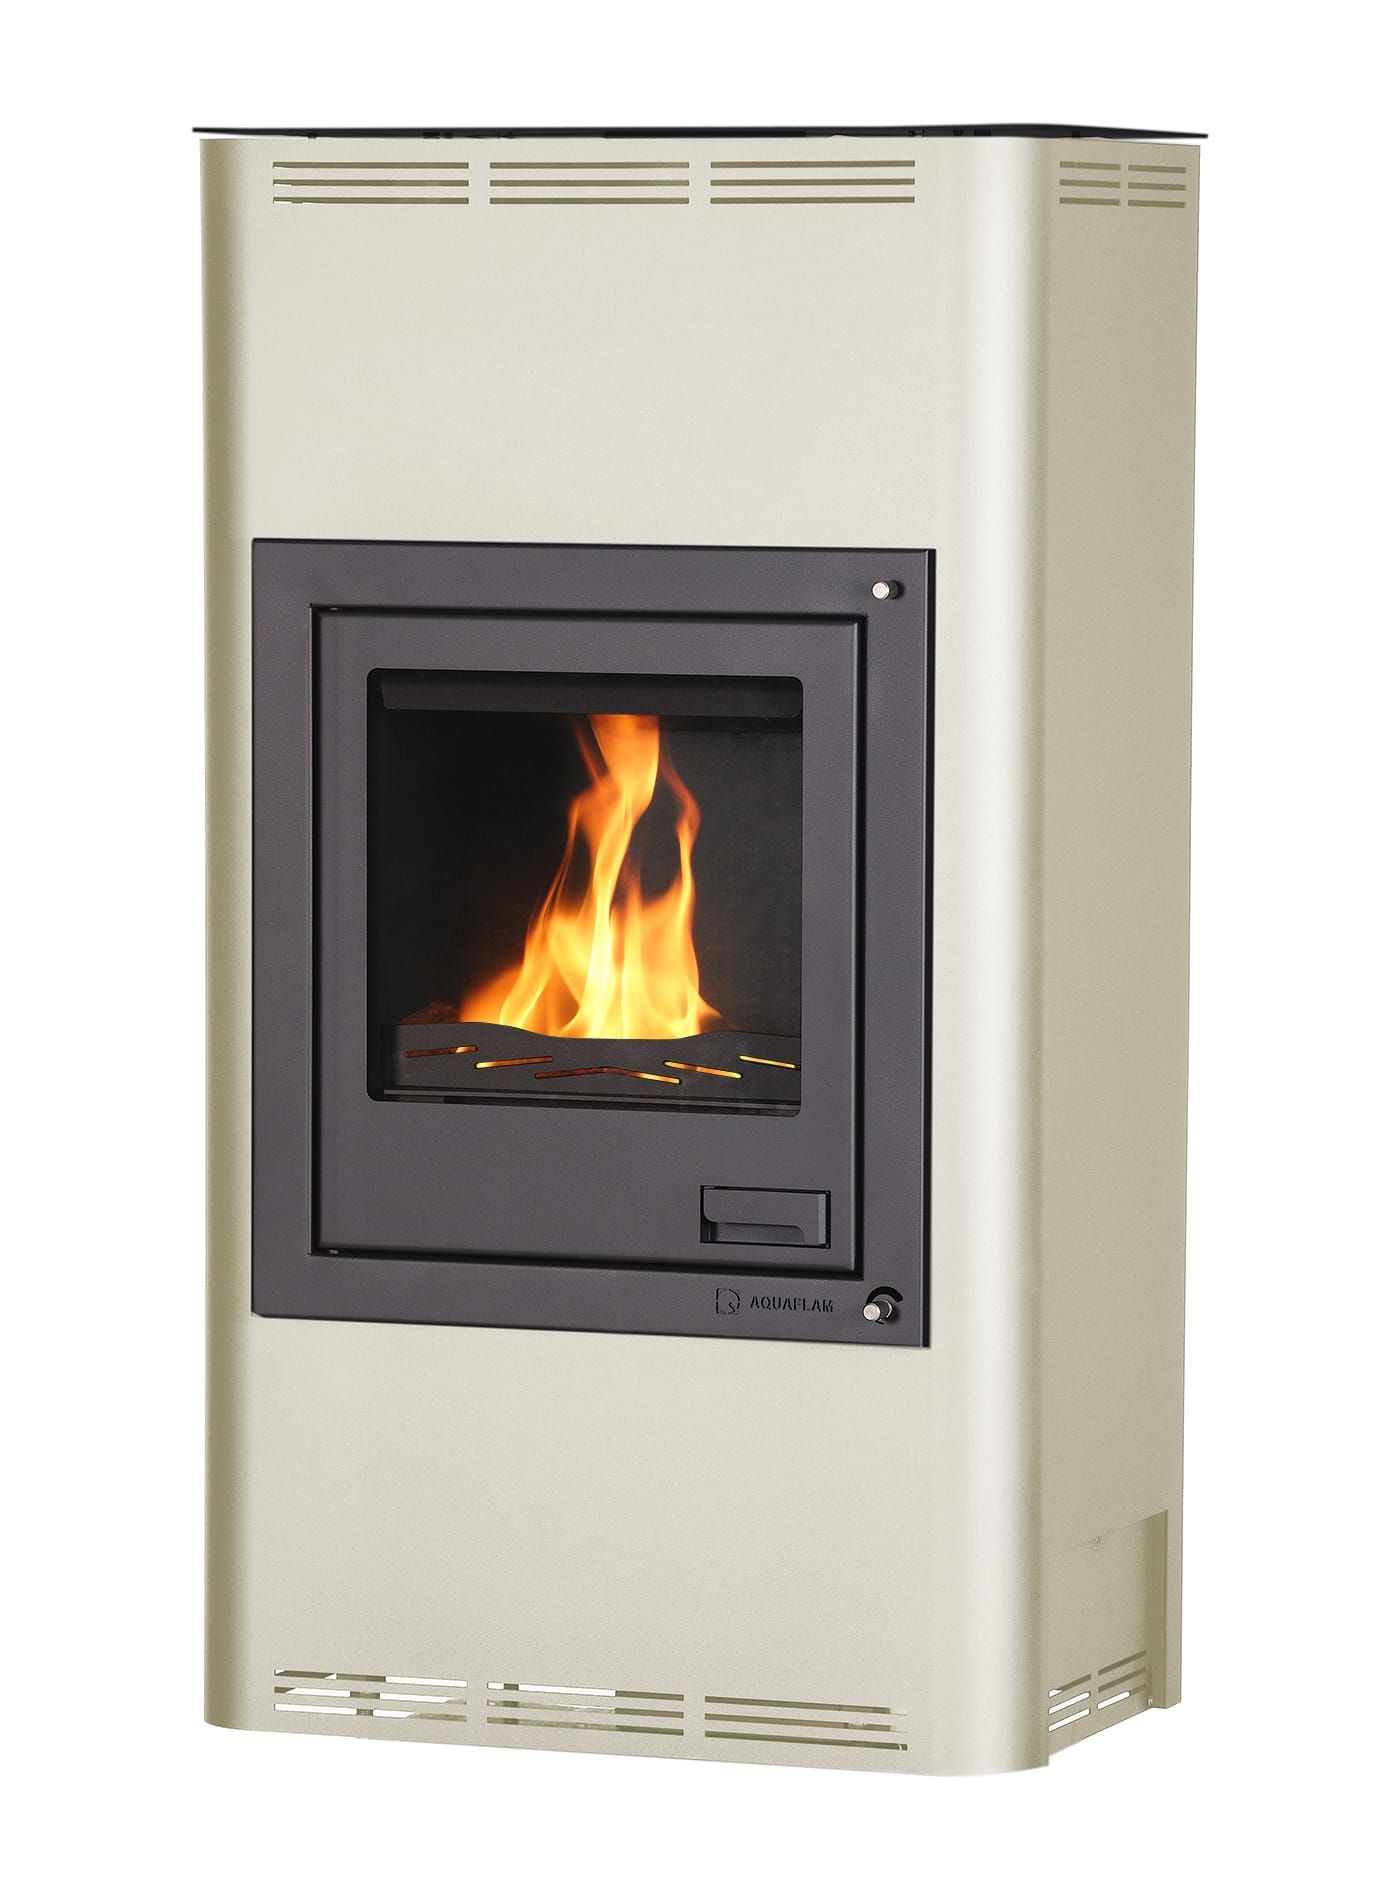 Aquaflam central heating fireplace 12 kW